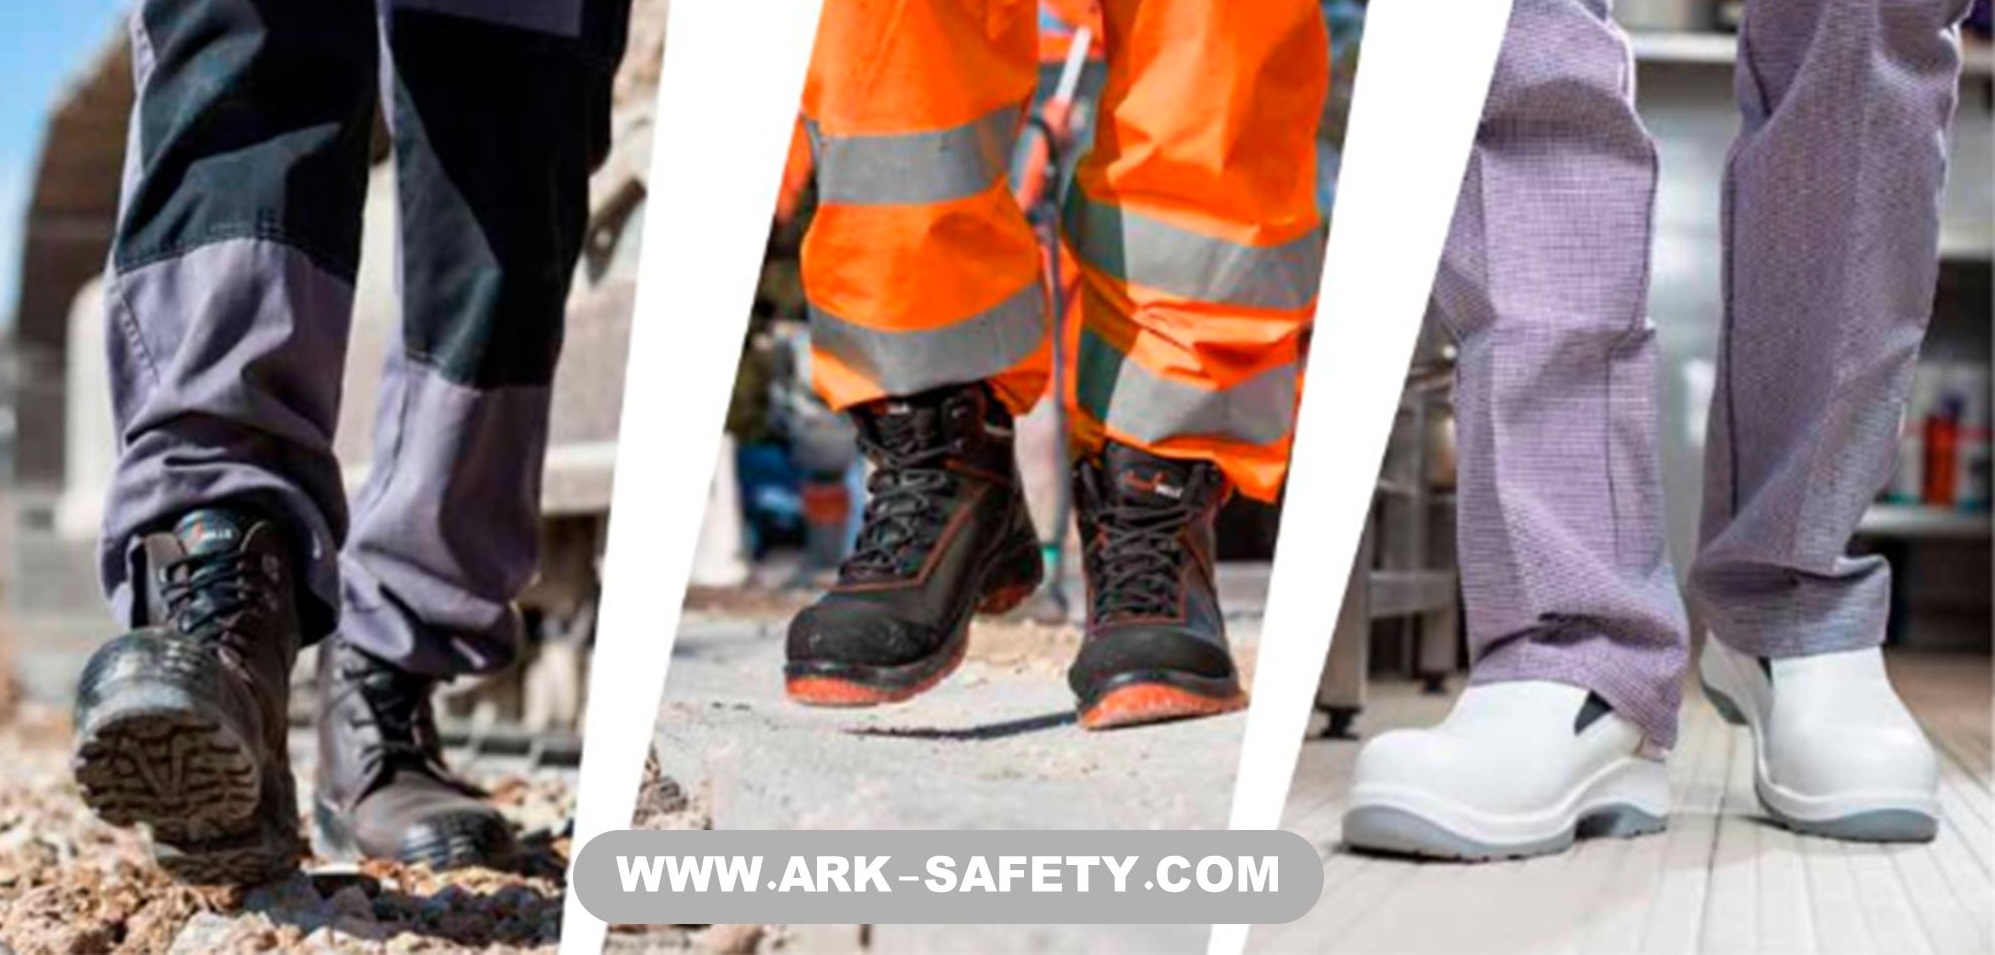 proper-safety-shoes-for-work